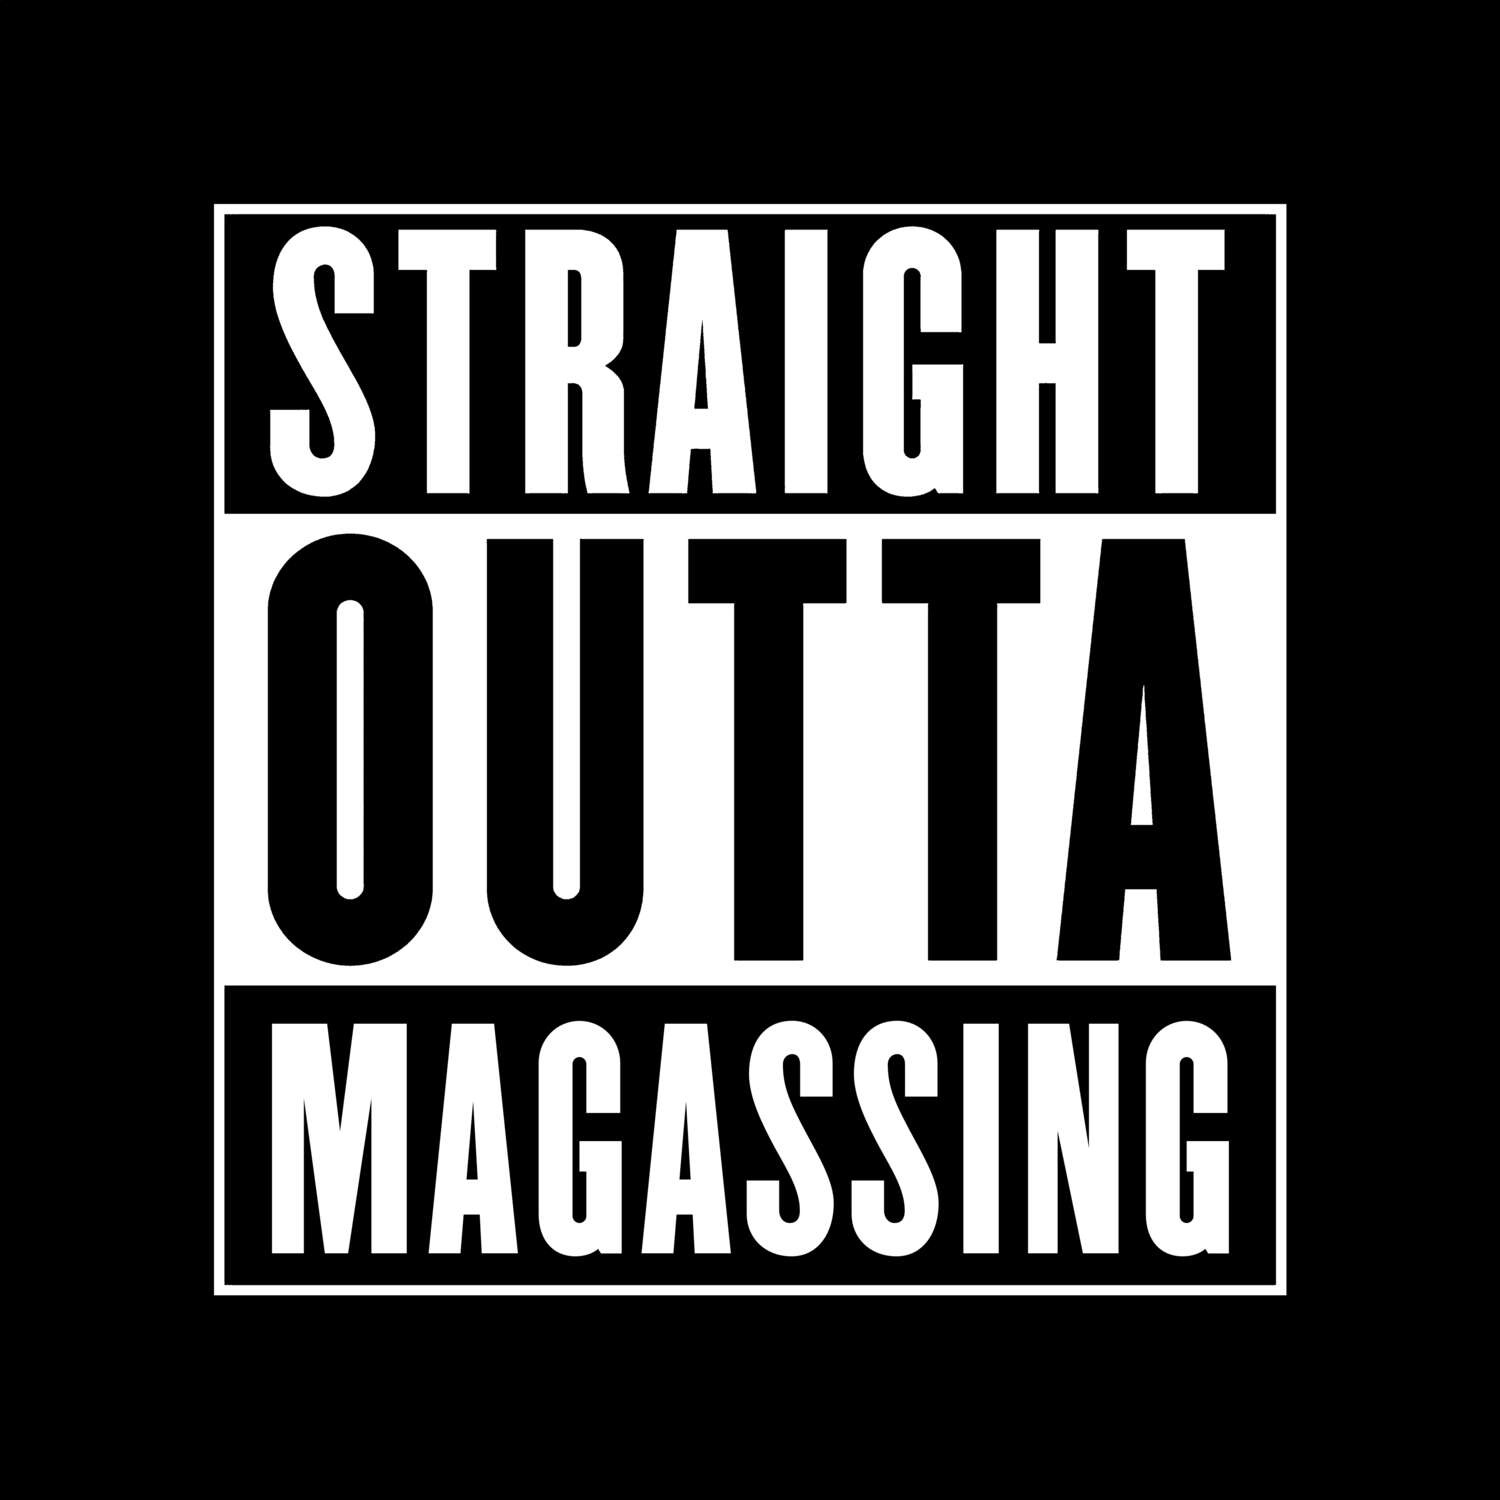 Magassing T-Shirt »Straight Outta«